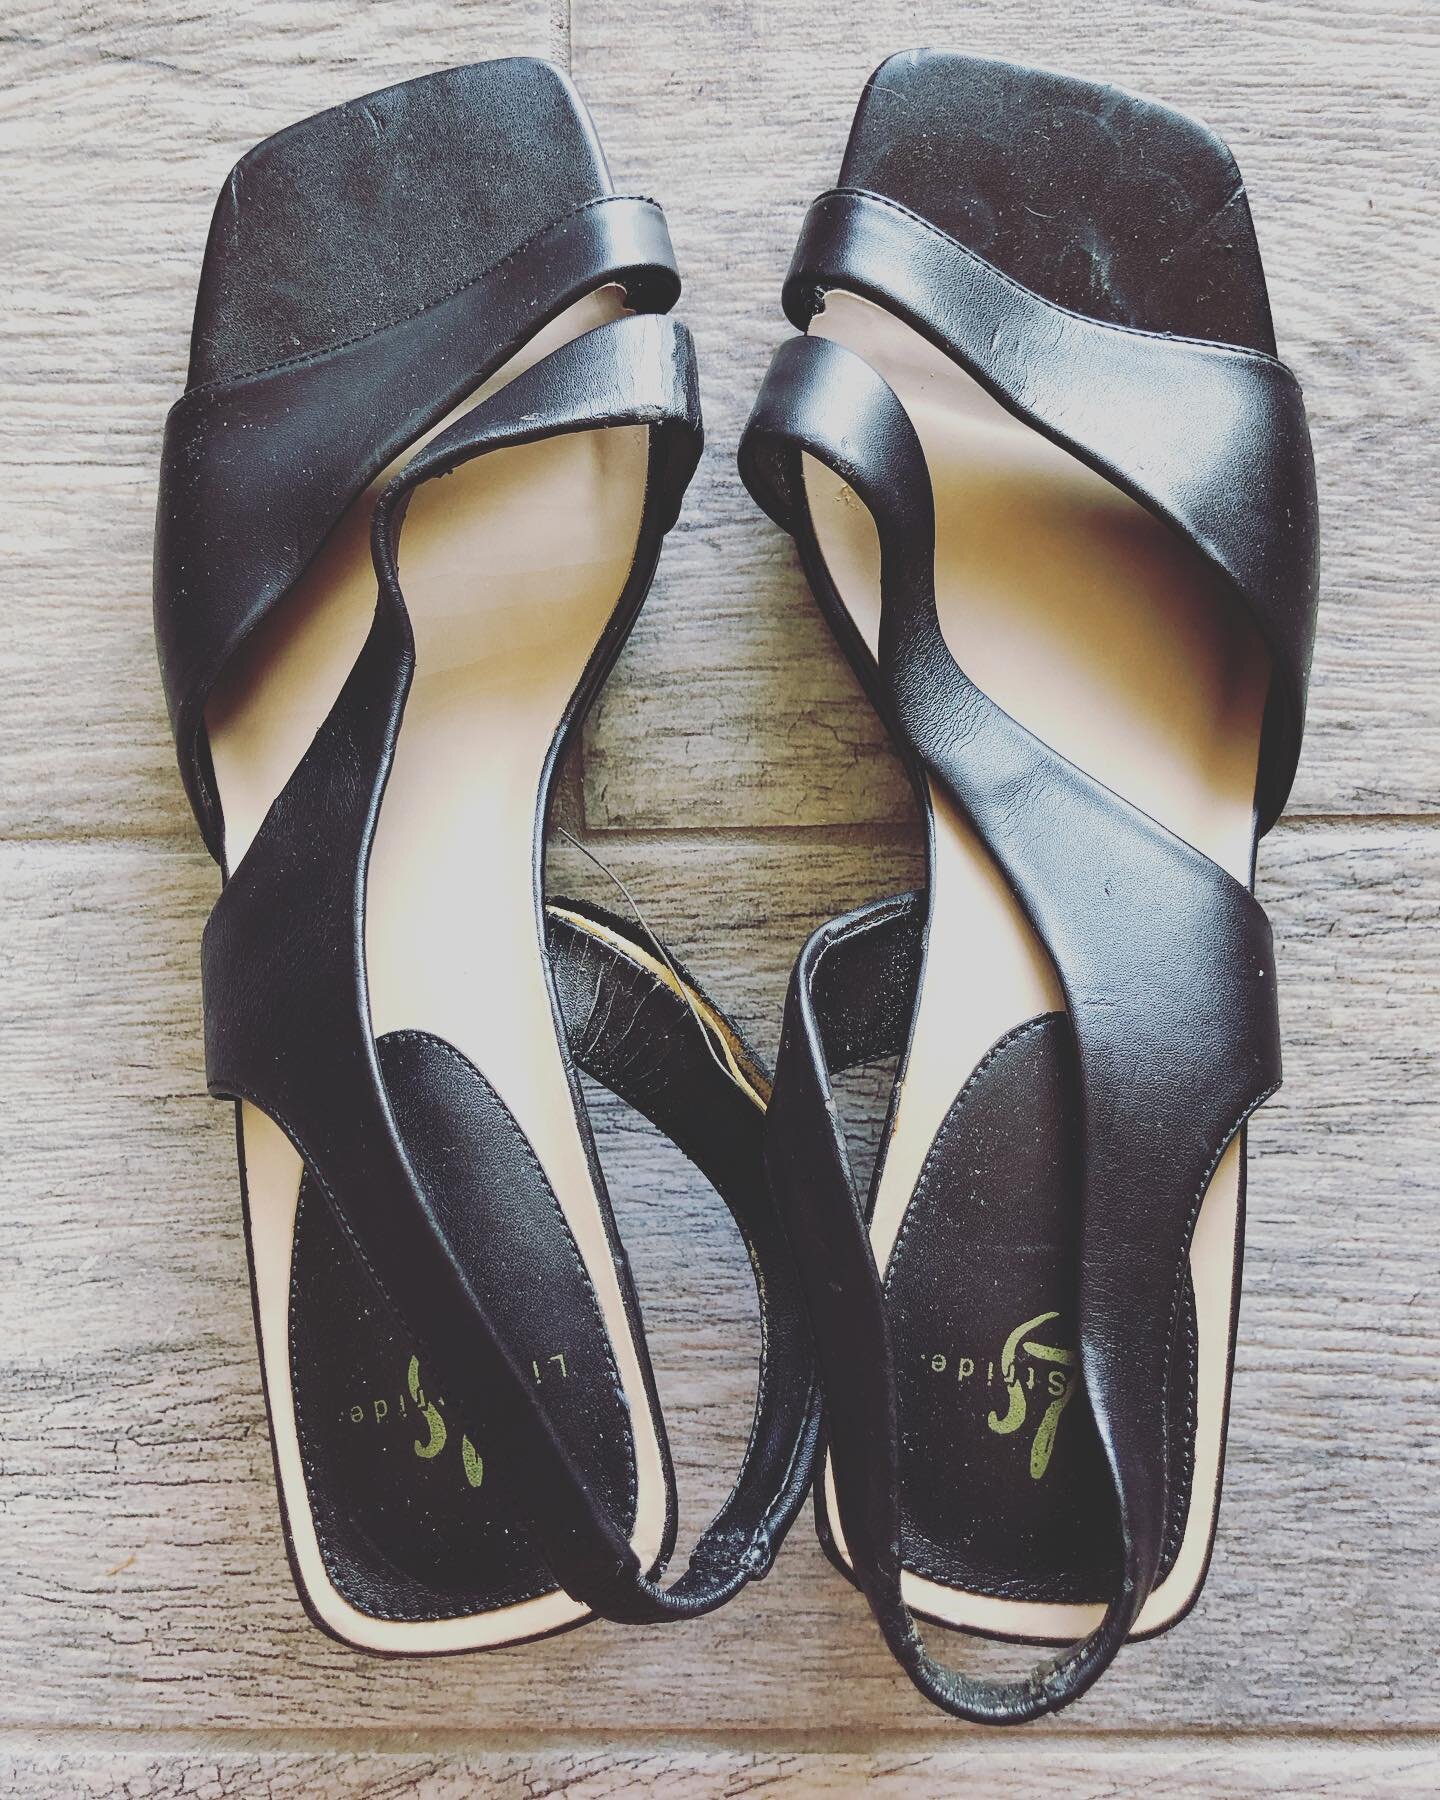 Sensible woman&rsquo;s strap oh shoes w a busted but in size 7 1/2 #shoes #sandals #heels #sensible #slingbacks #toecleavage #fashion #90s #ungratefulgranddaughter 

#forsale #garagesale #fleamarket #selling #stuff #secondhand #reuse #reduce #recycle